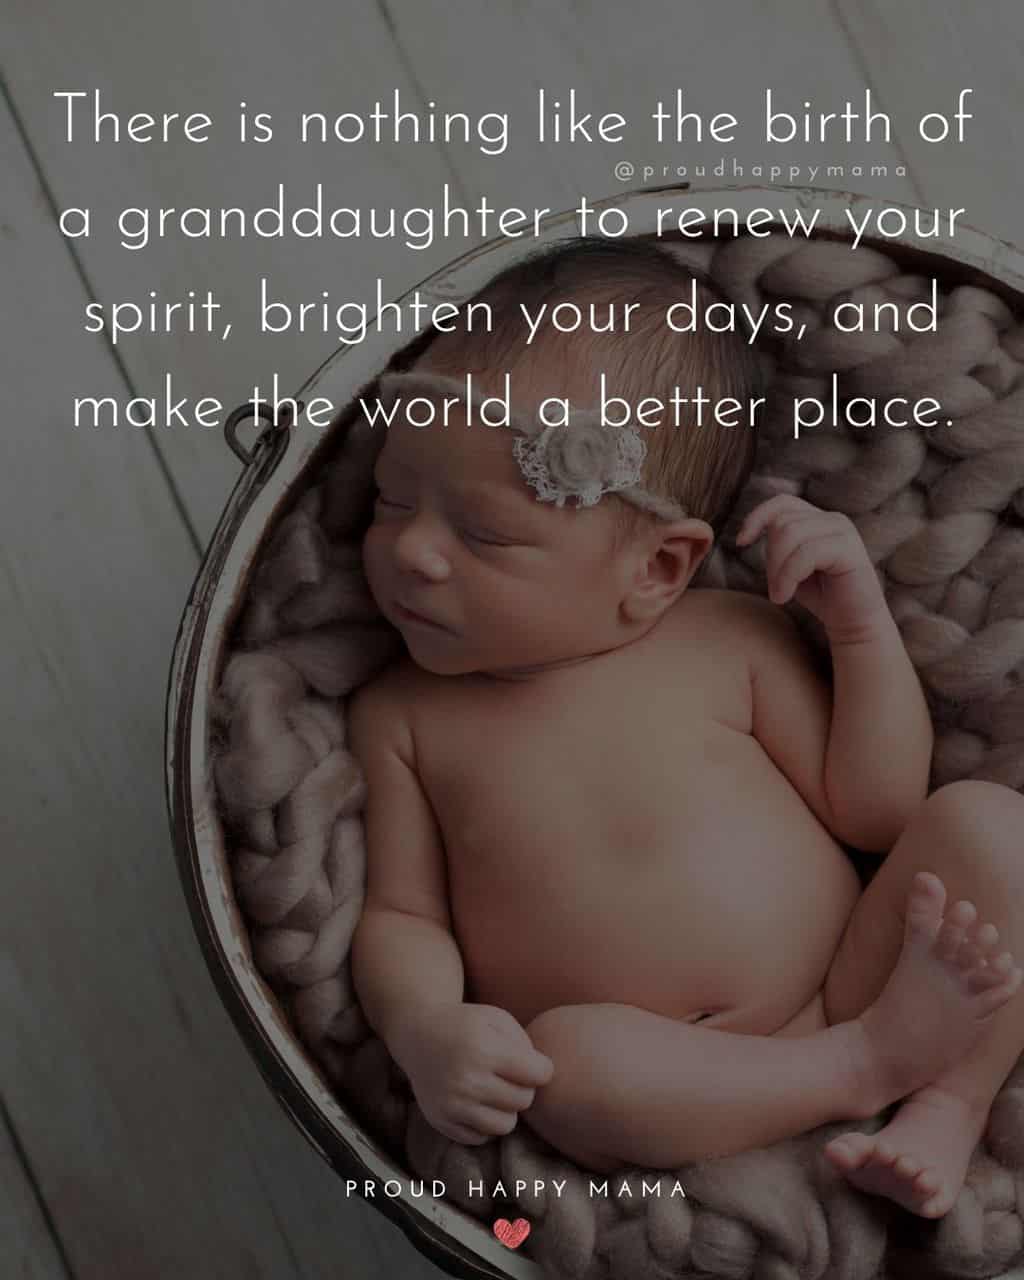 Granddaughter Quotes - There is nothing like the birth of a granddaughter to renew your spirit, brighten your days, and make the world a better place.